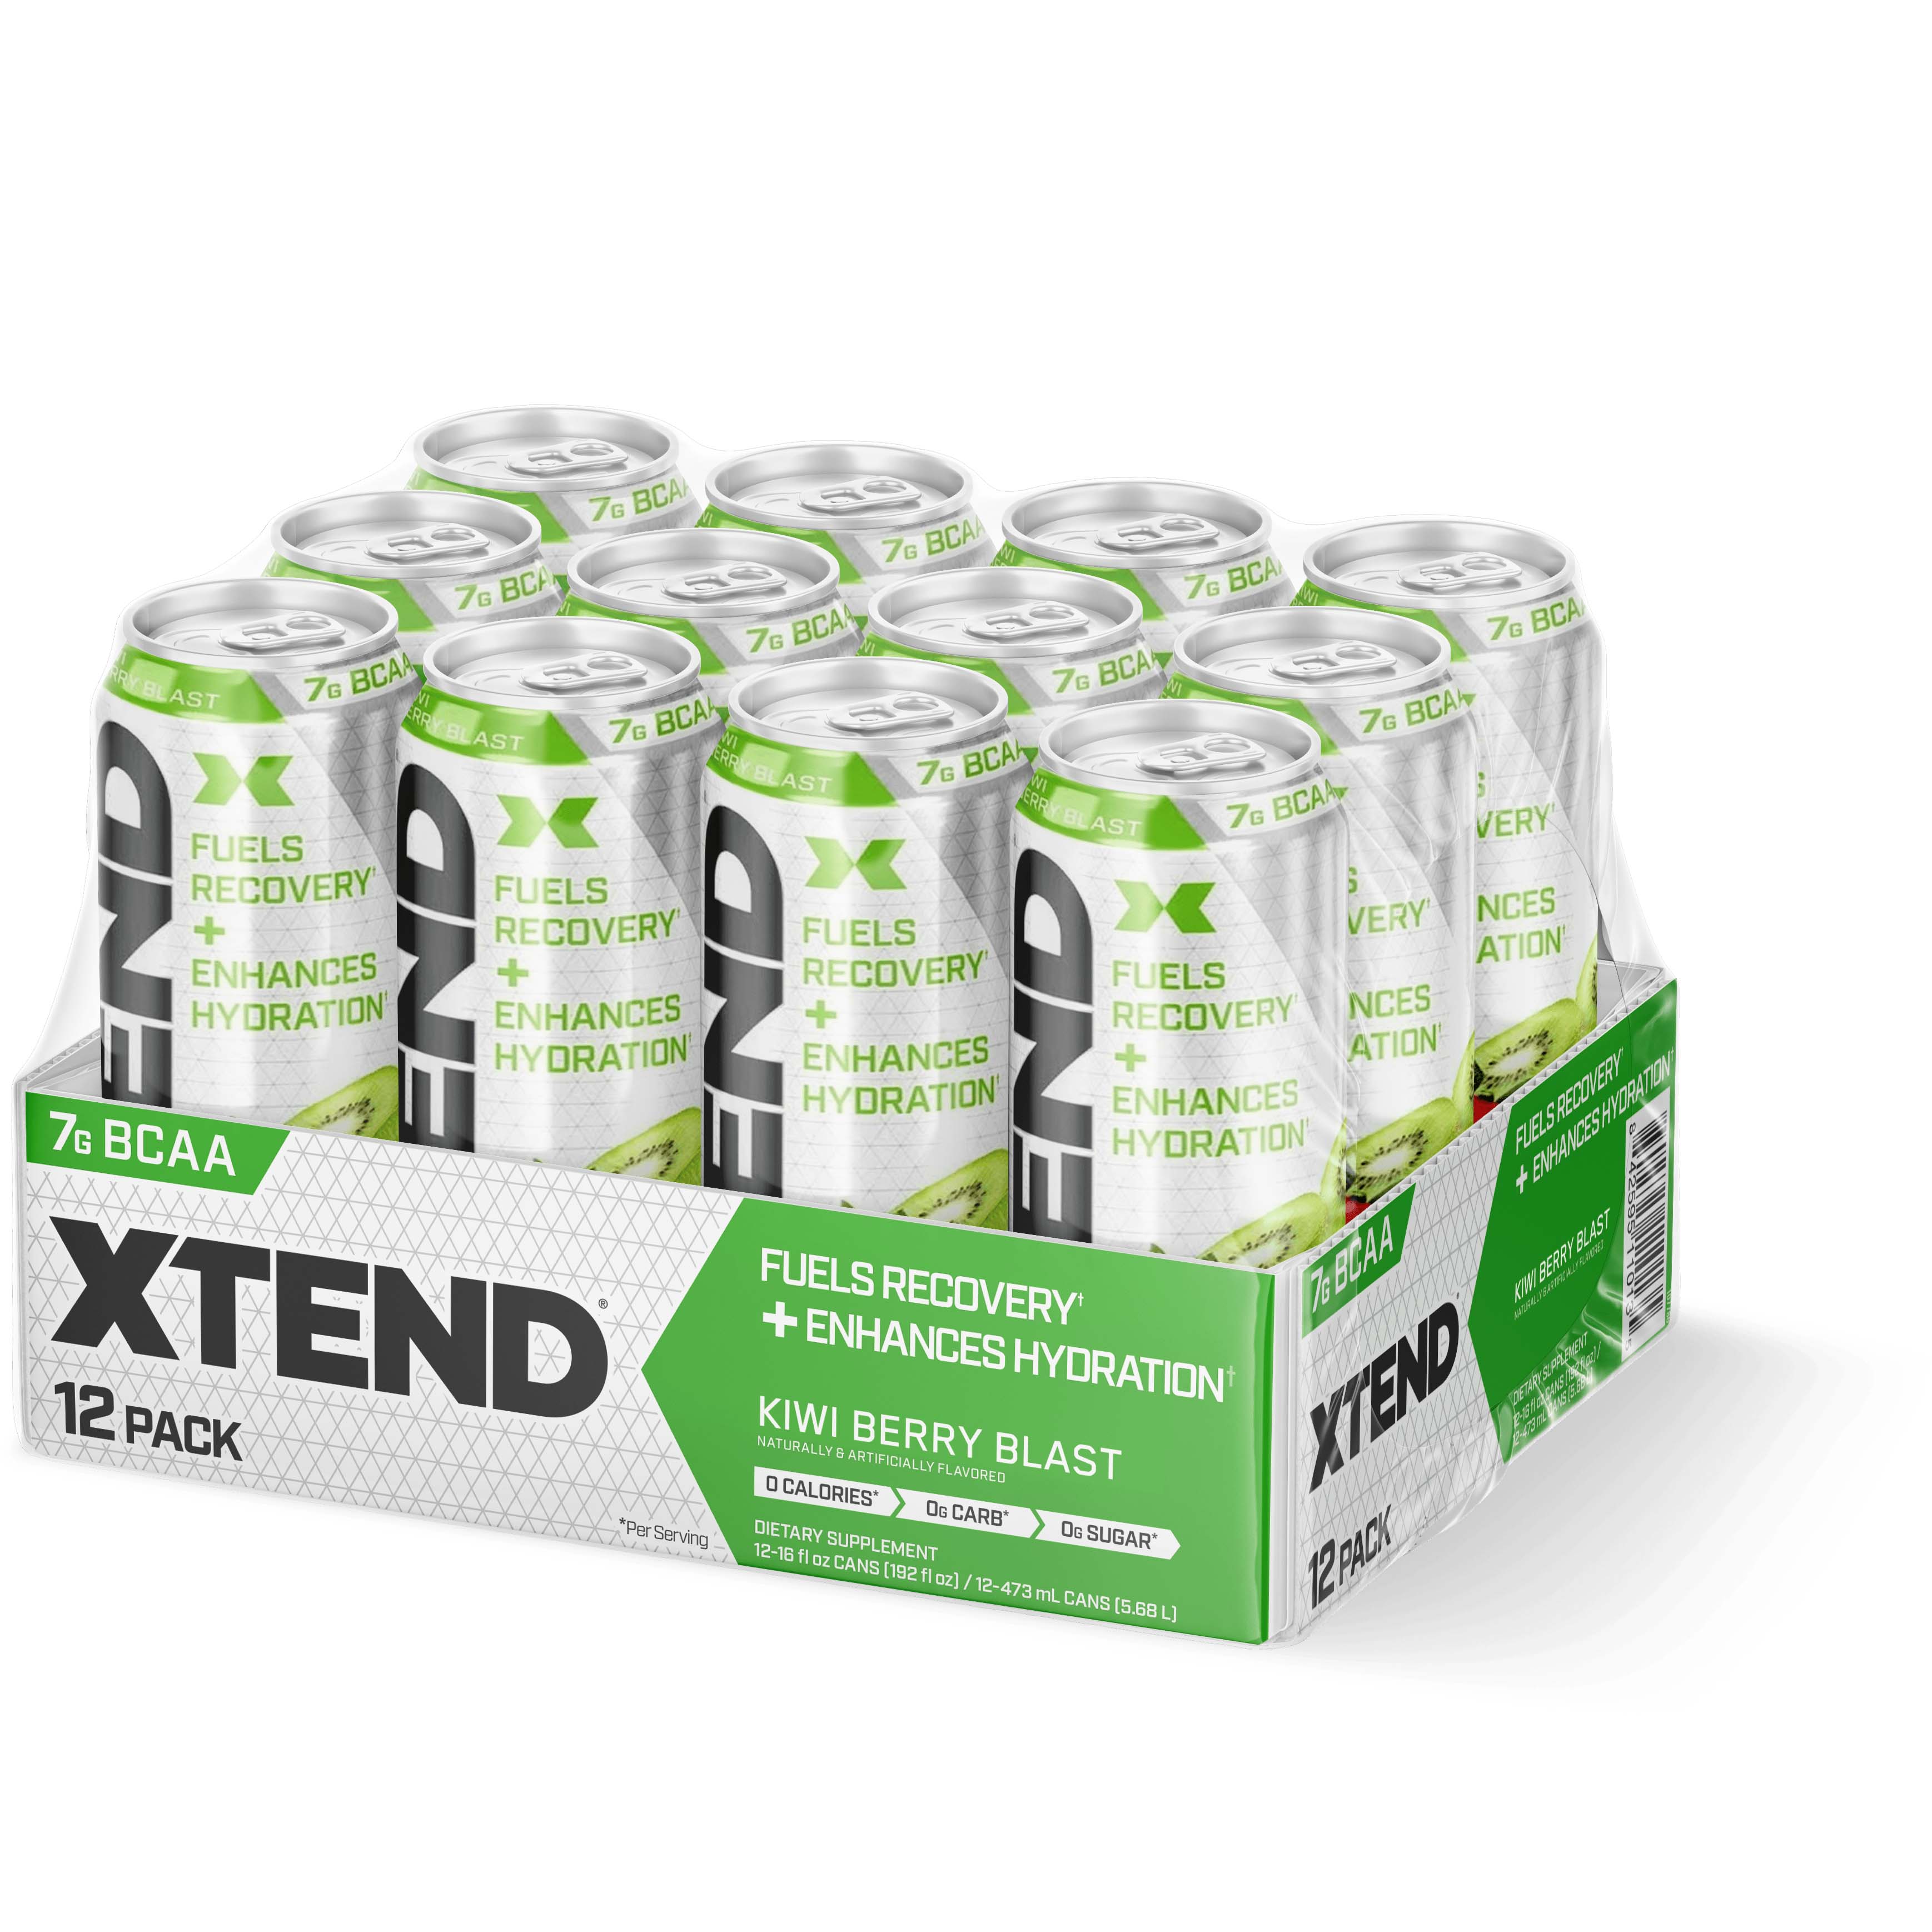 Xtend Carbonated Zero Sugar Hydration & Recovery Drink Box of 12 Pieces Kiwi Berry Blast